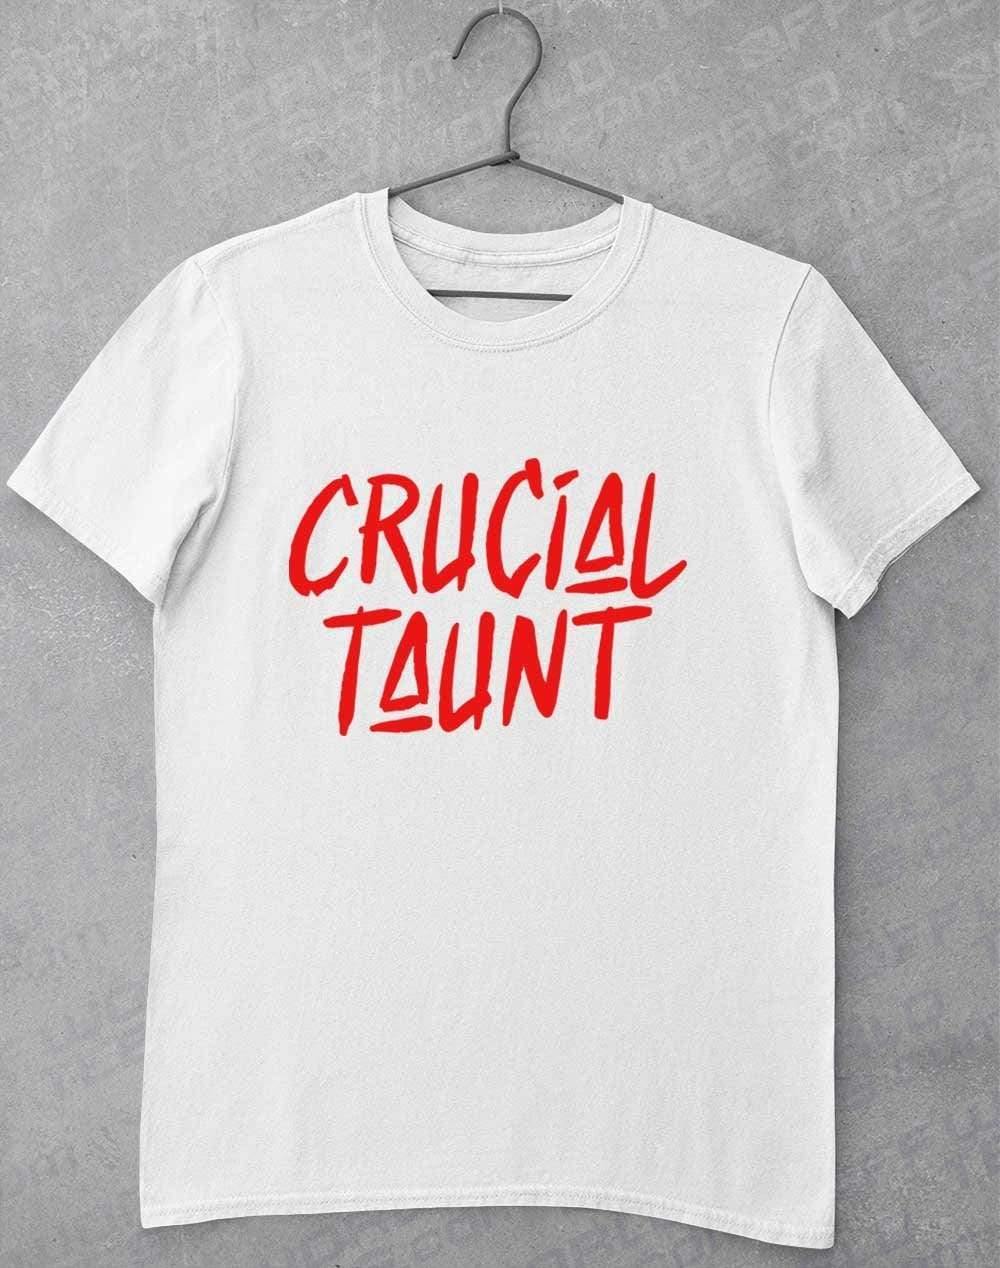 Crucial Taunt T-Shirt S / White  - Off World Tees